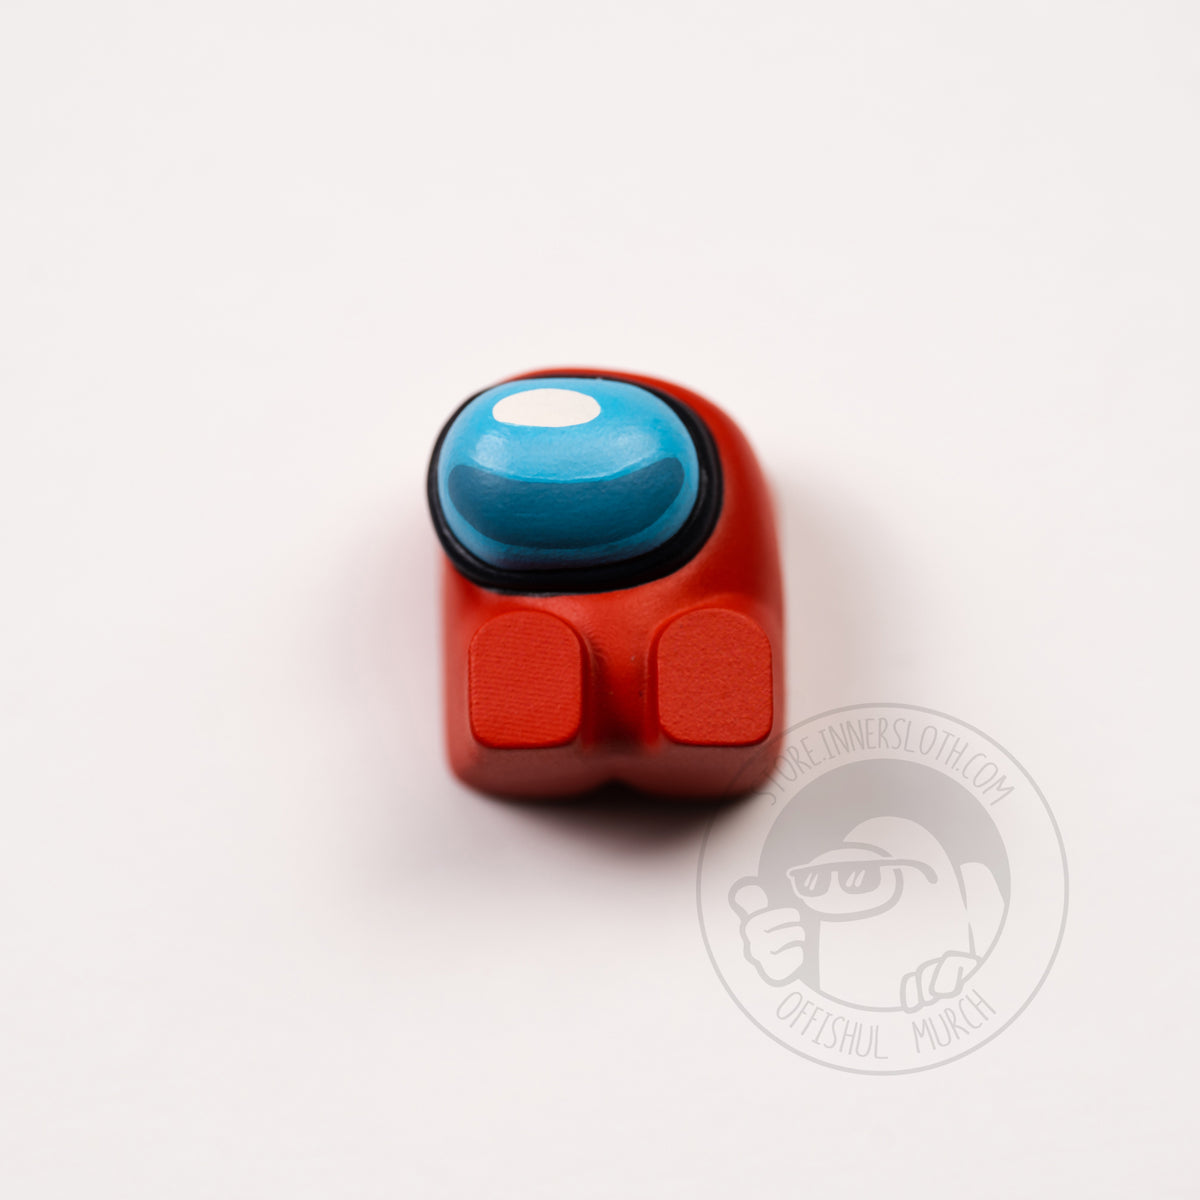 A product photo from above of the red keyboard keycap.